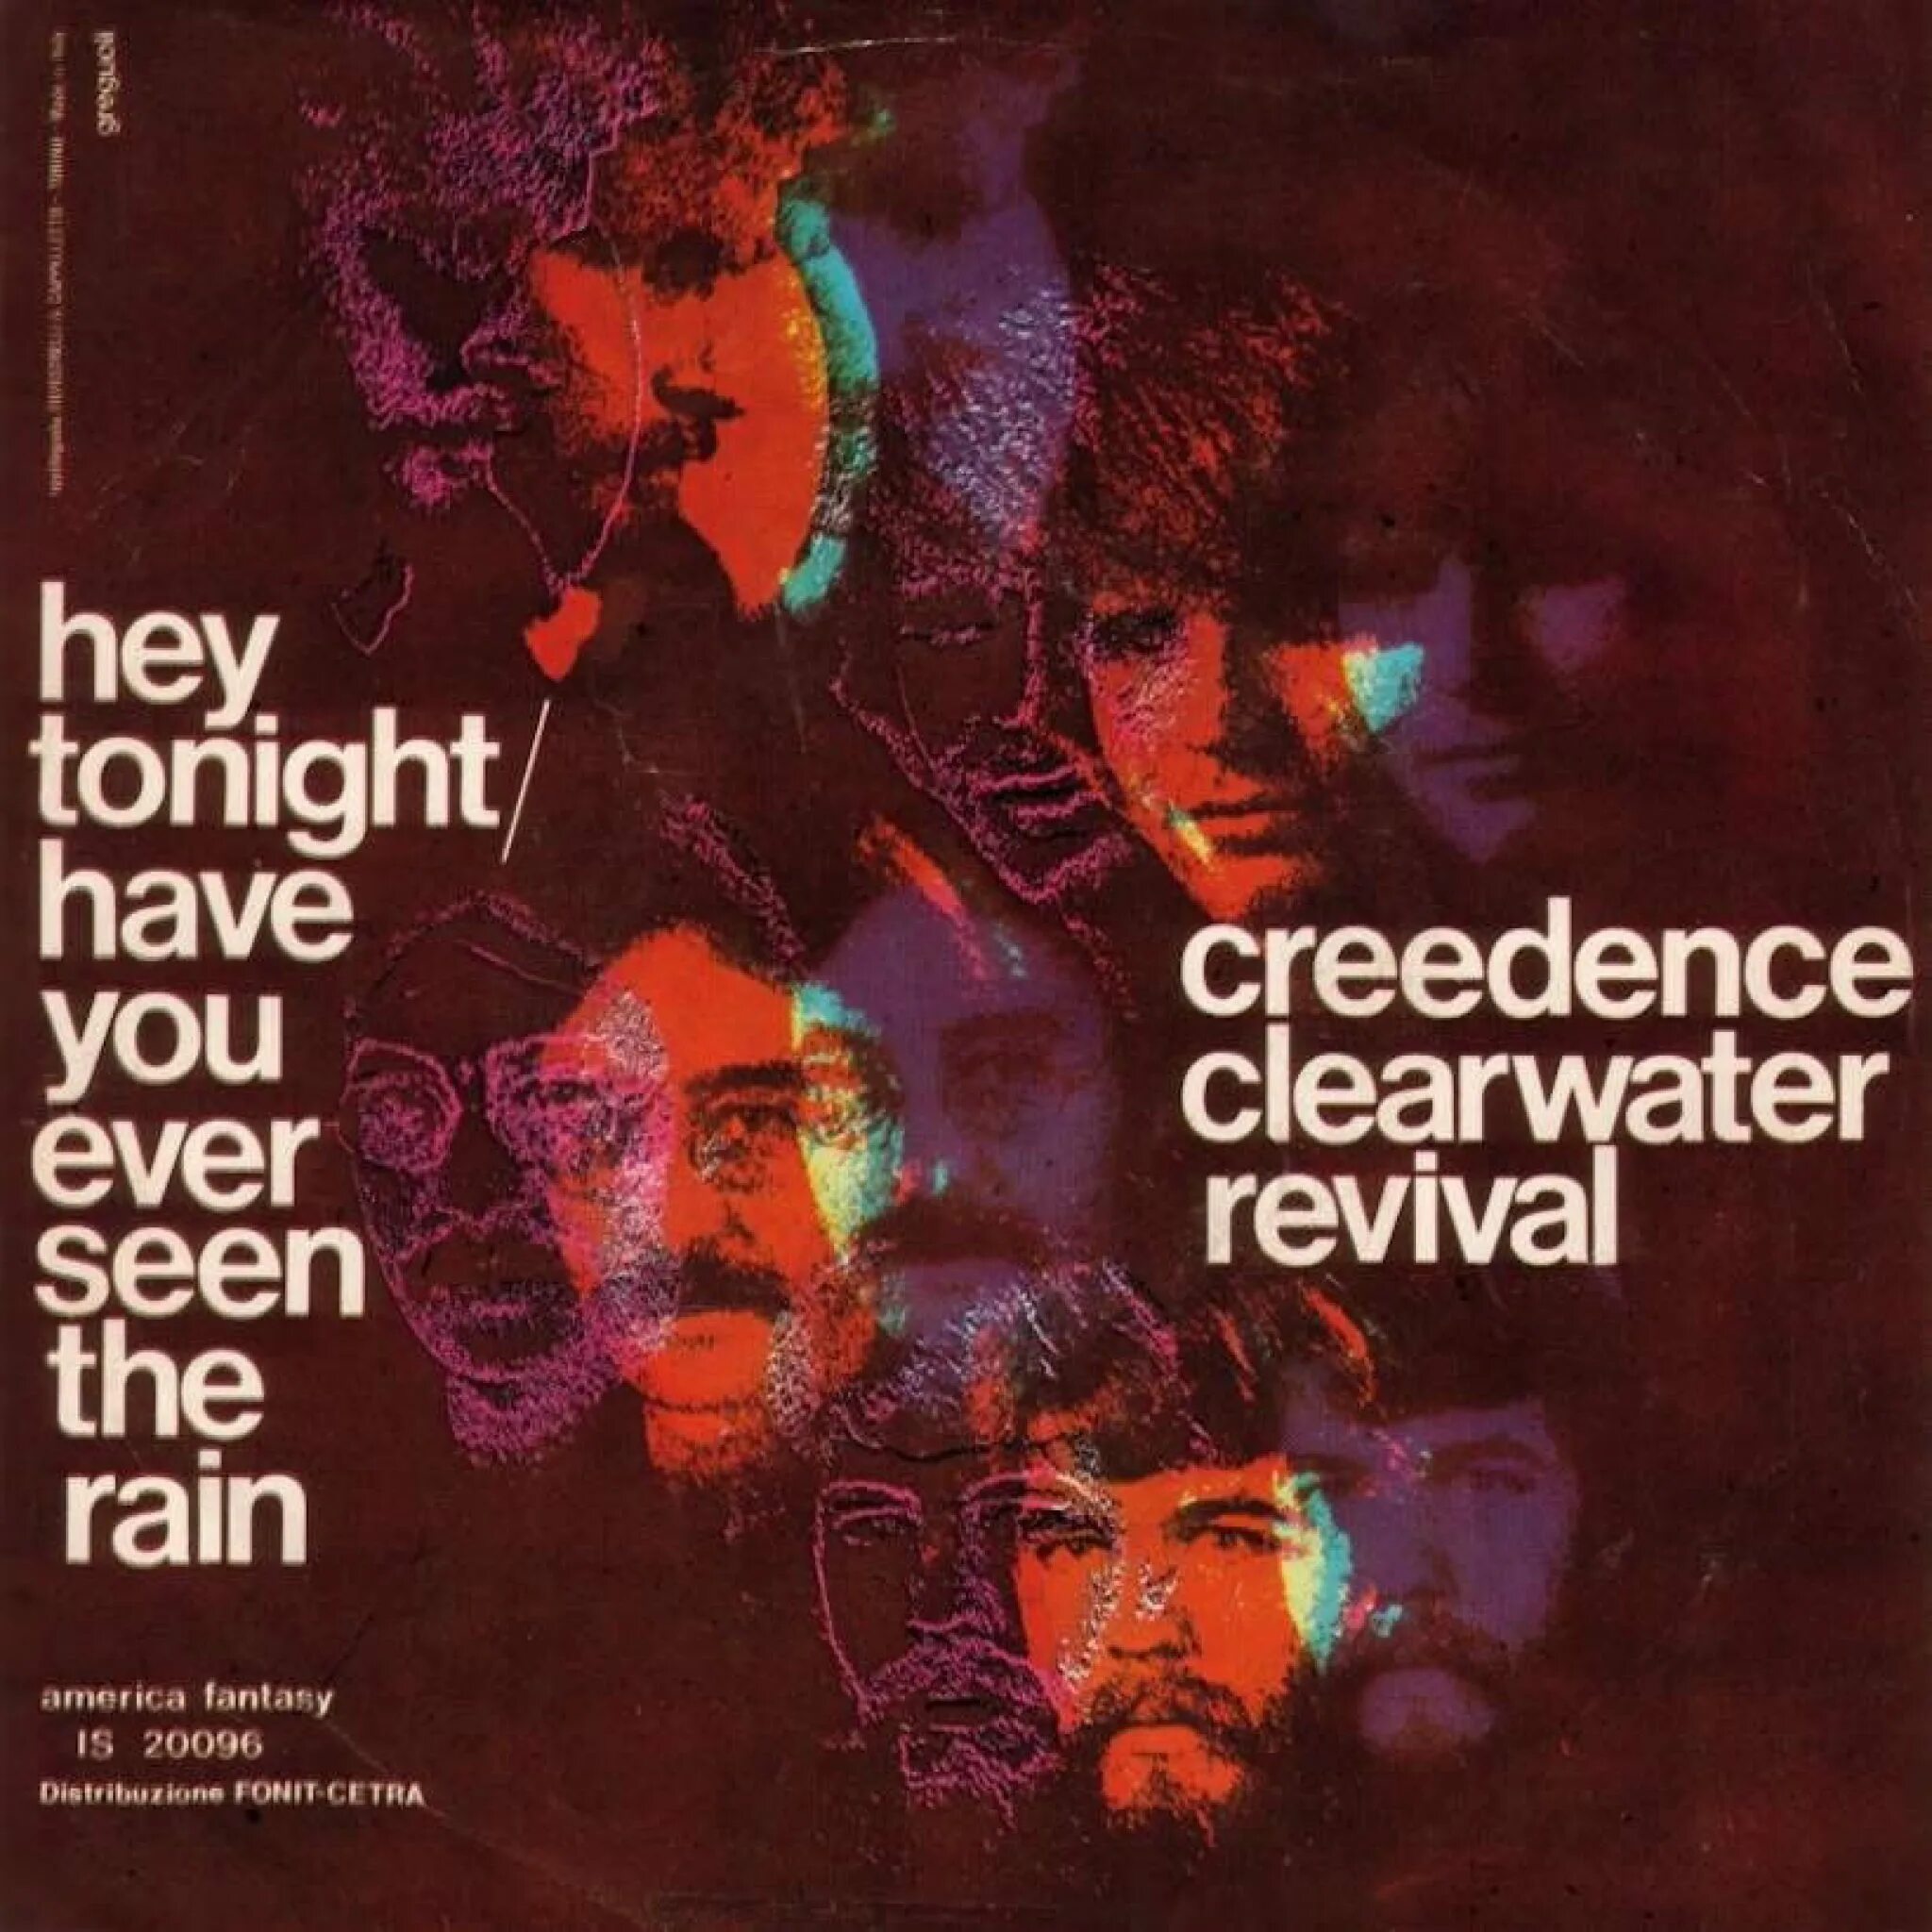 Creedence clearwater revival rain. Creedence Clearwater Revival. Creedence Clearwater Revival - have you ever seen the Rain. Have you ever seen the Rain Криденс. Creedence Clearwater Revival - have you ever seen the Rain (1970).